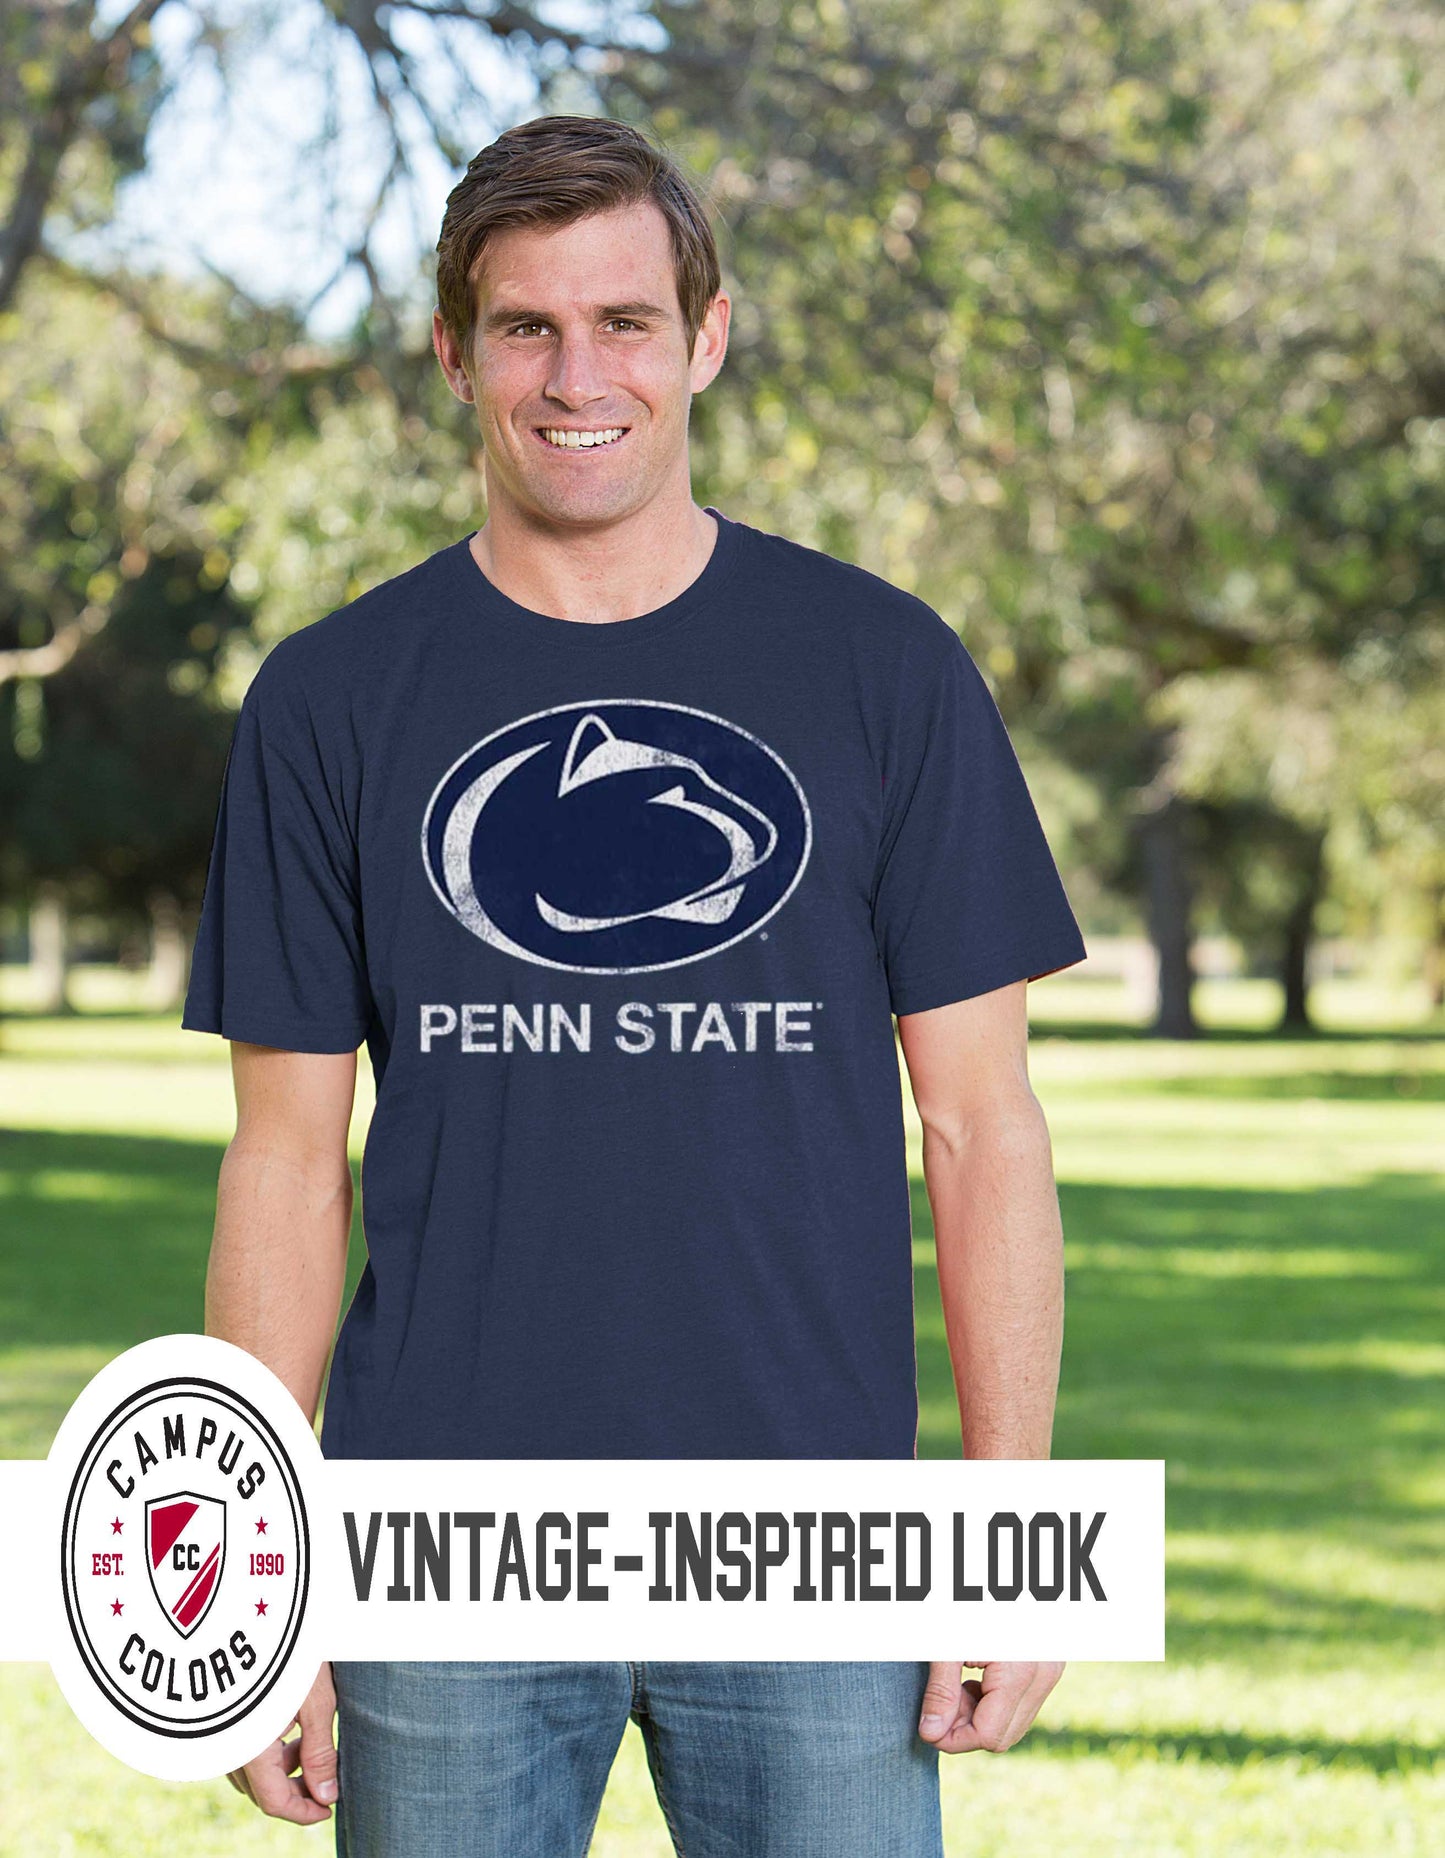 Penn State Nittany Lions Adult MVP Heathered Cotton Blend T-Shirt - Navy